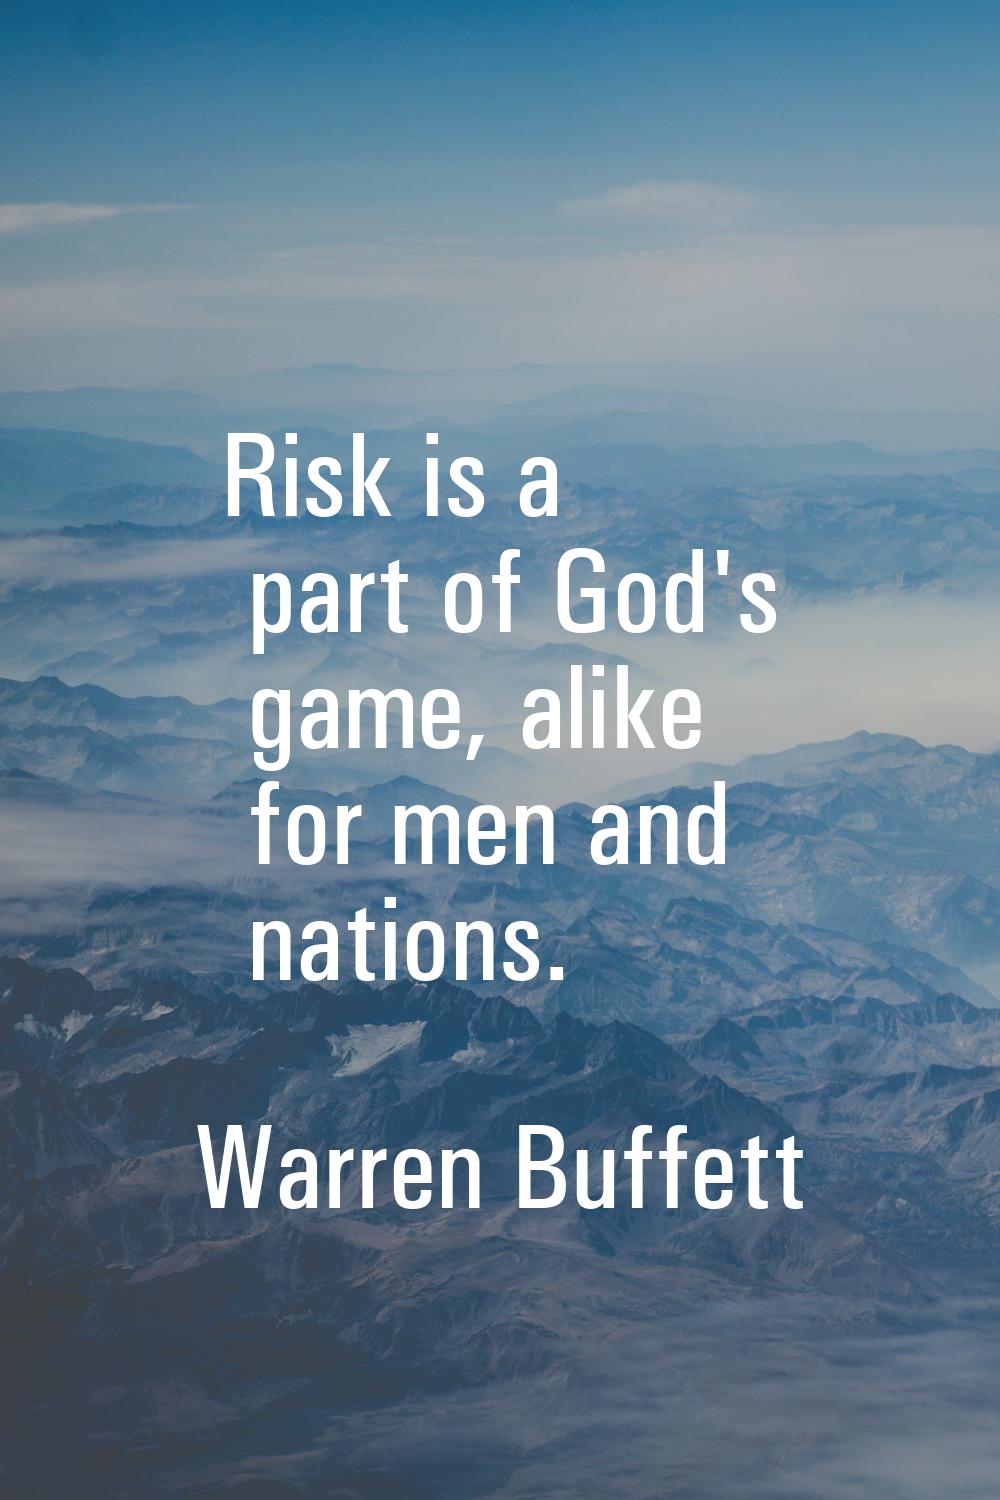 Risk is a part of God's game, alike for men and nations.